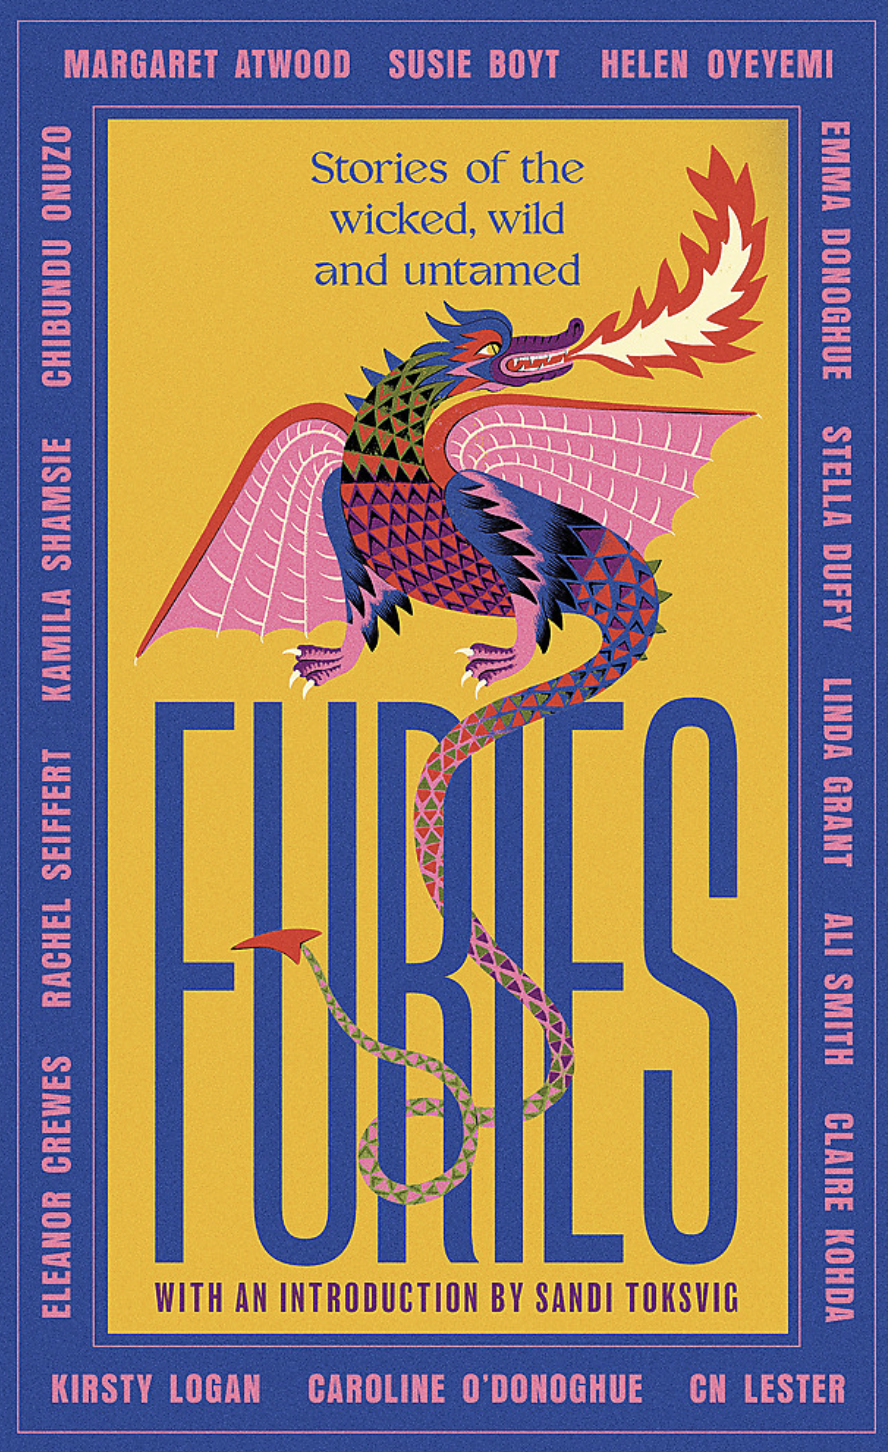 Furies - Margaret Atwood, Ali Smith, Emma Donoghue and Kirsty Logan